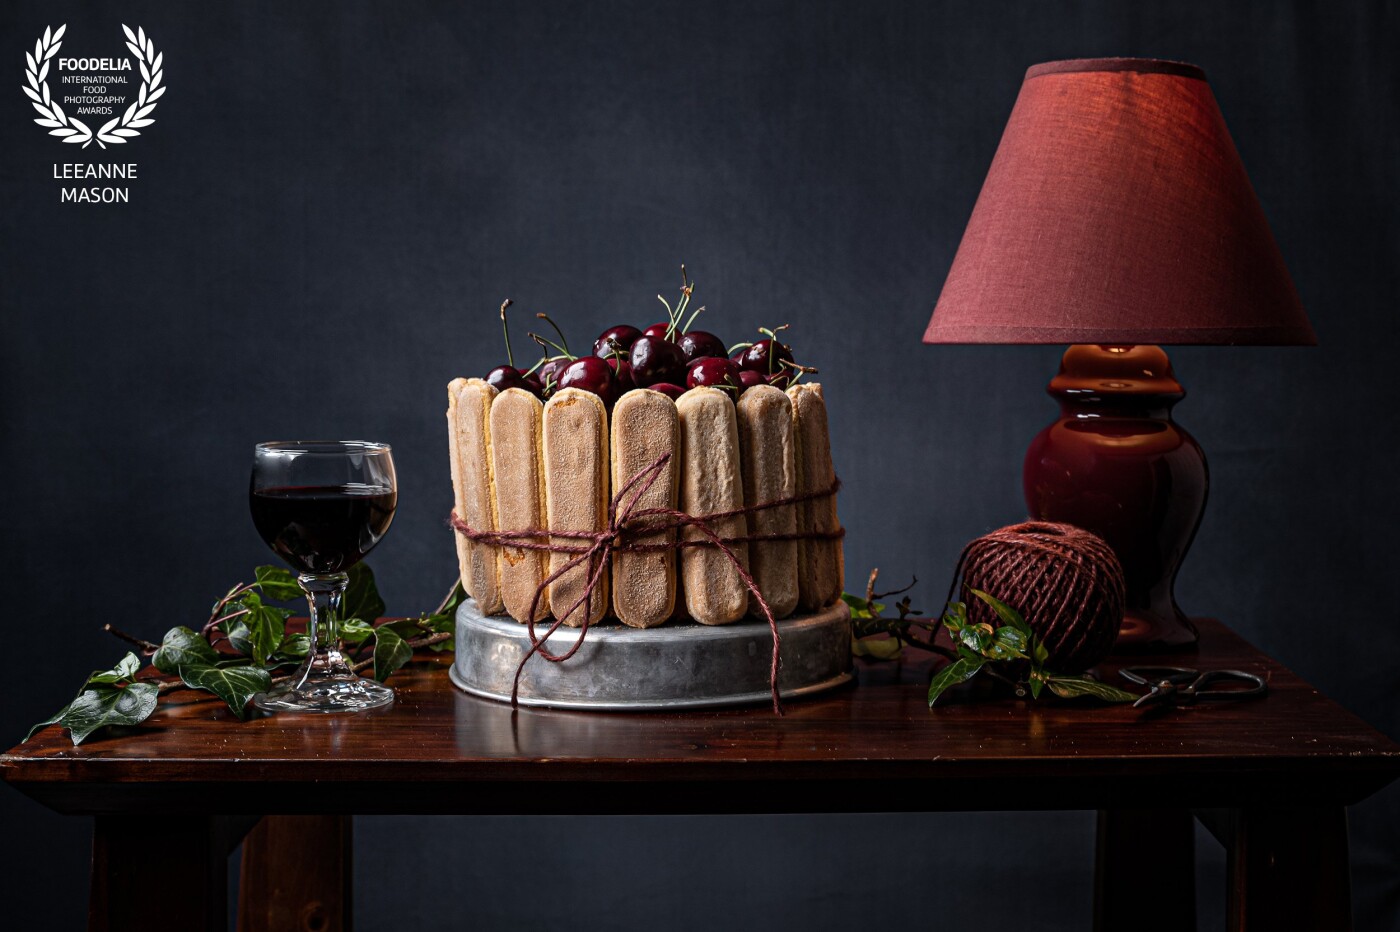 This is a Cherry Sponge decorated with Lady Fingers in a Still Life scene with a holiday theme colour composition.  I lit the background in addition to the lamp and used a softbox to light the scene from different angles.